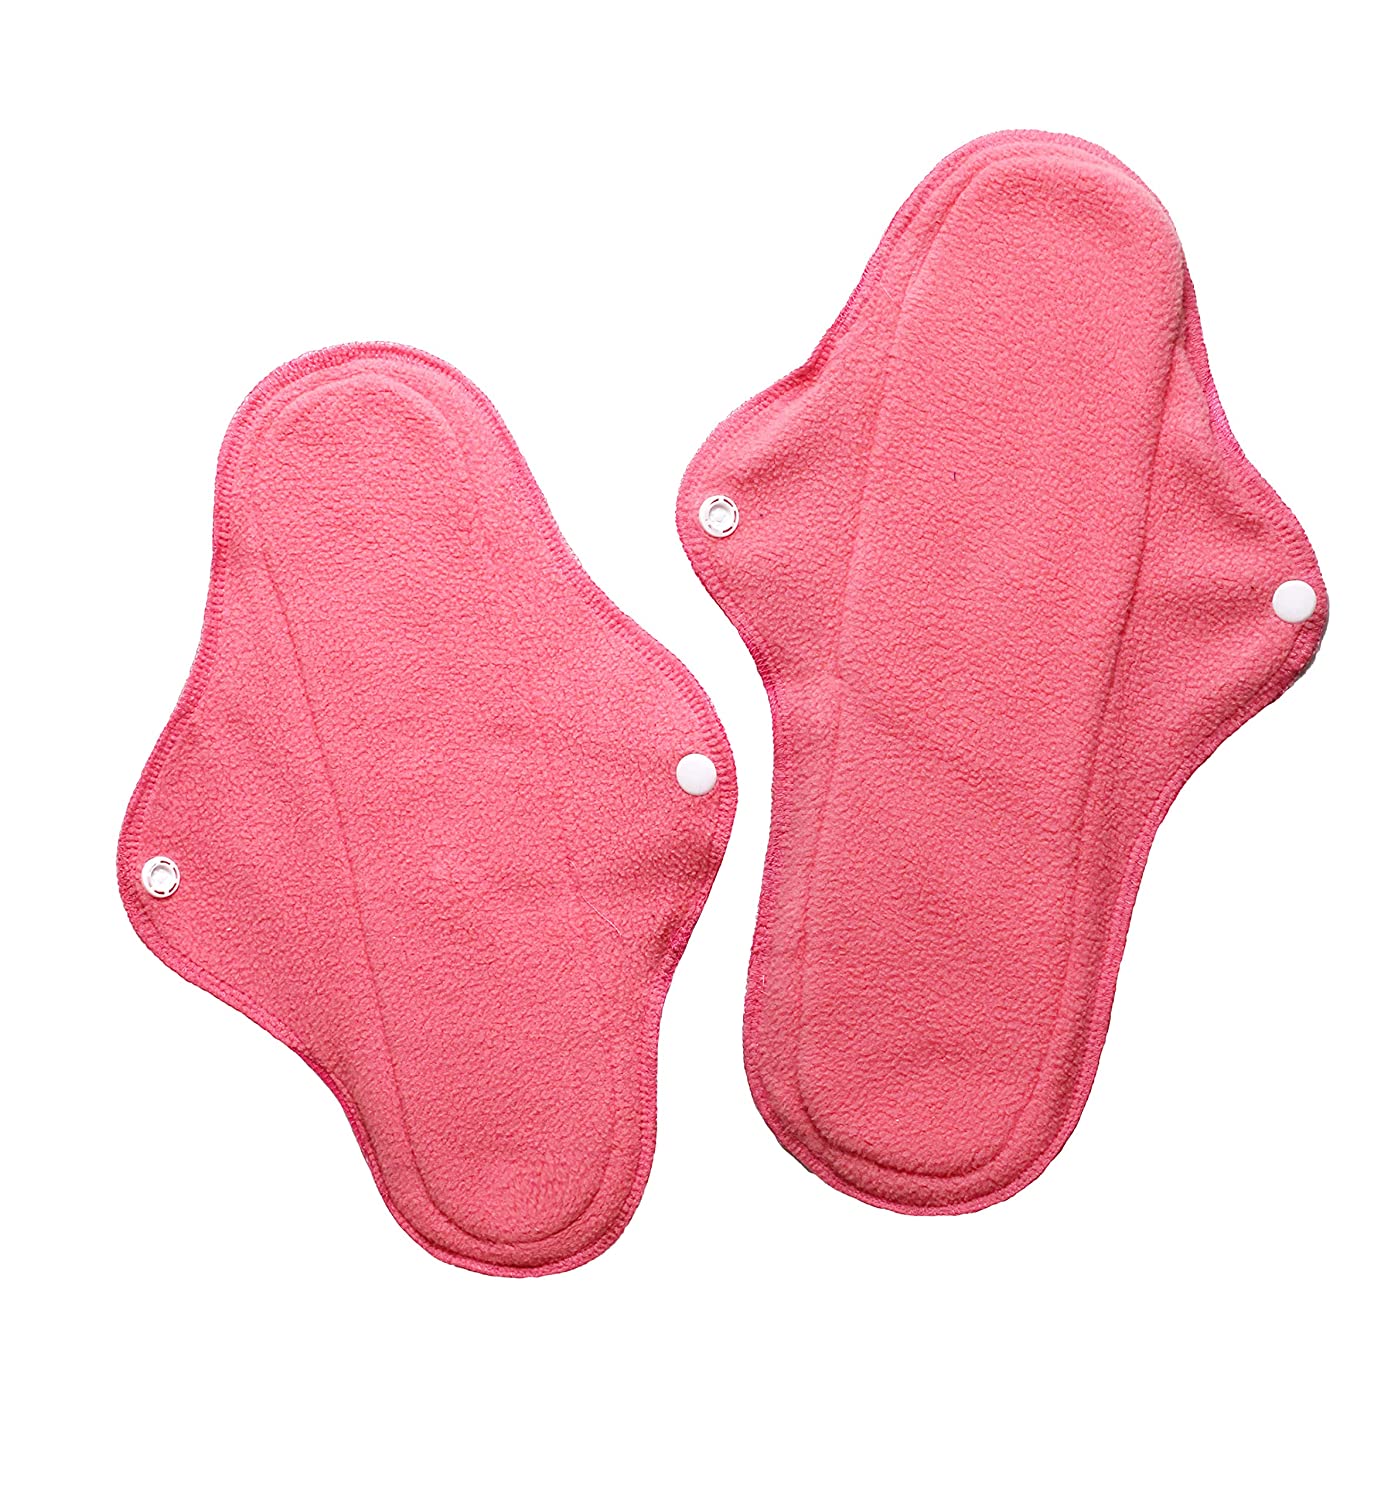 Reusable Cloth Pads - Pack of 2 - Pink